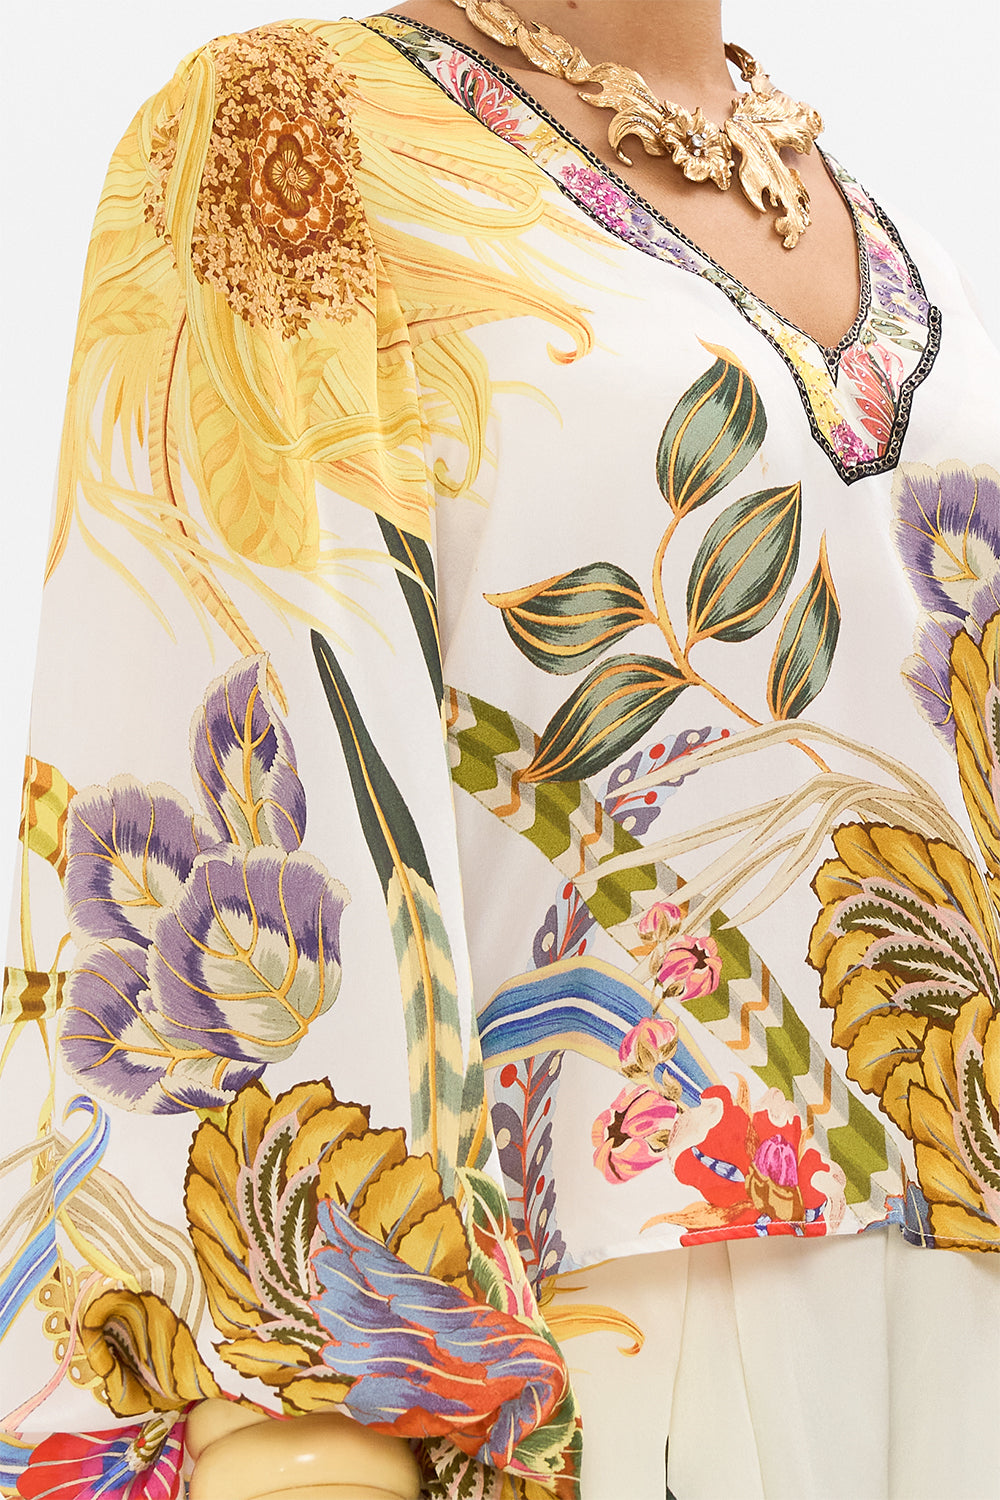 CAMILLA silk blouse in Sunflowers On My Mind print